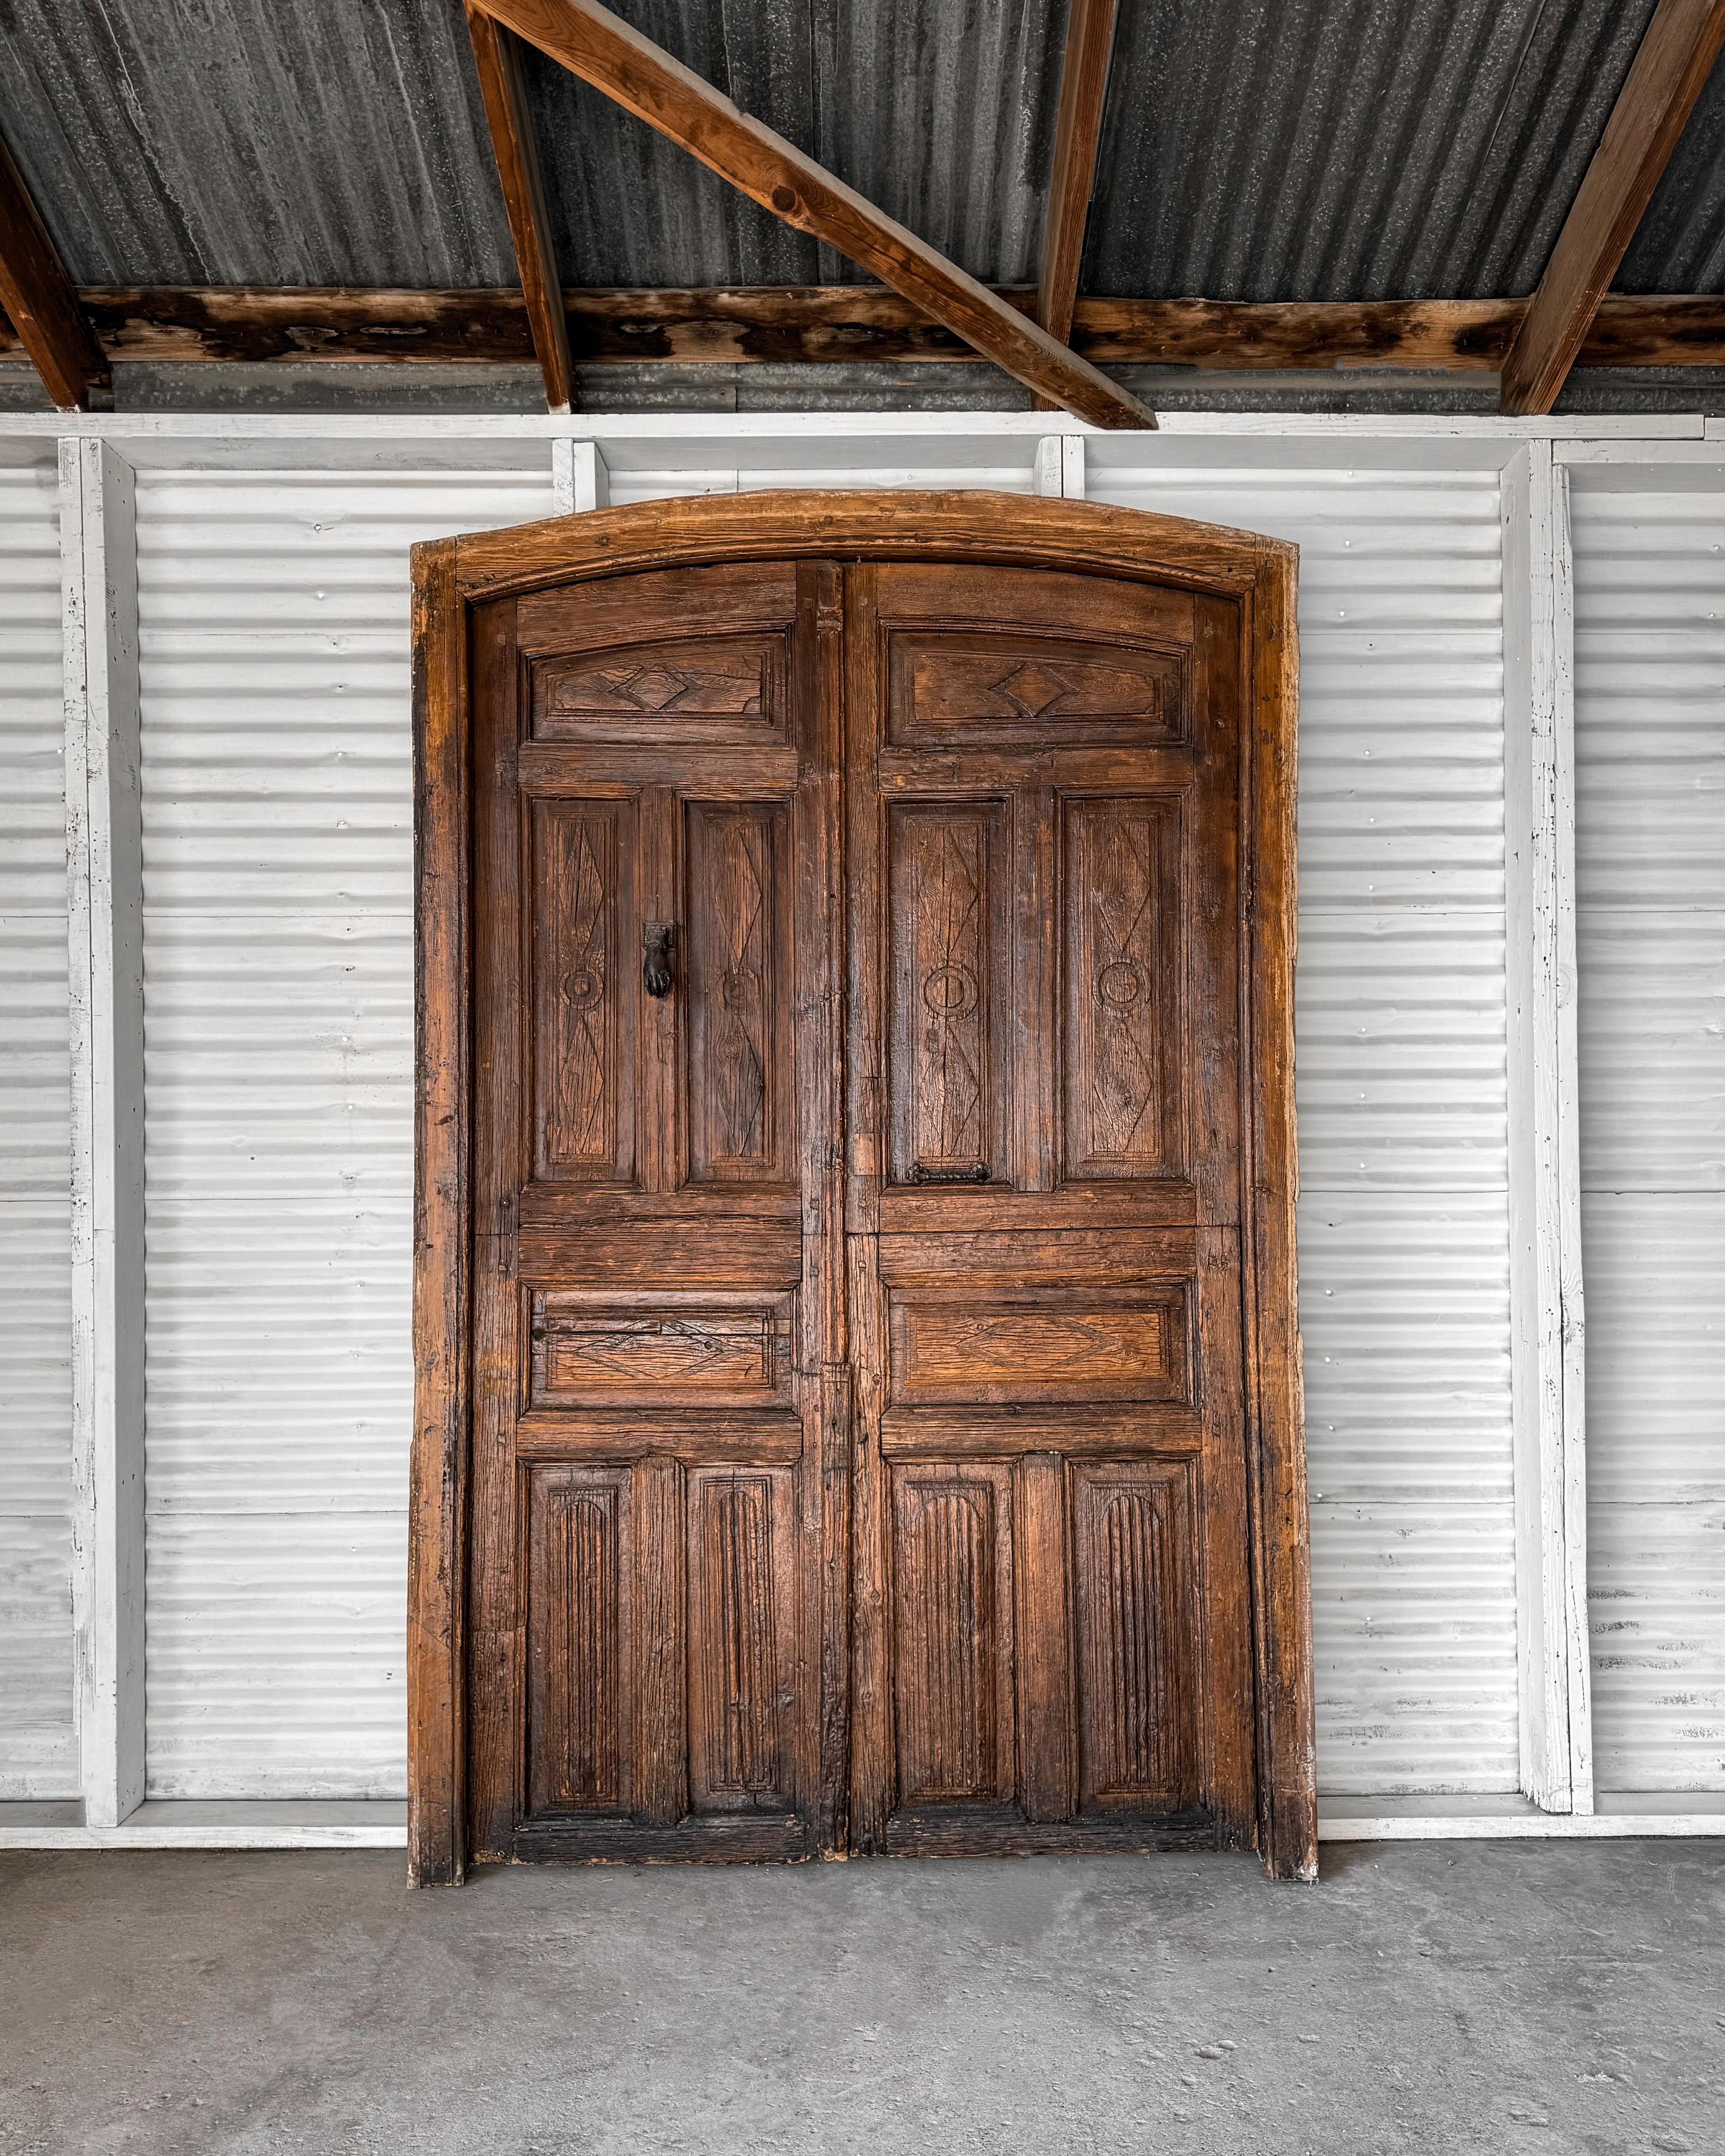 A pair of solid oak 18th-century arched paneled hacienda doors. Hand-carved details decorate the doors, which are set in the original arched frame. Both doors and frame feature a medium-dark stain that has worn to a beautiful patina. The original